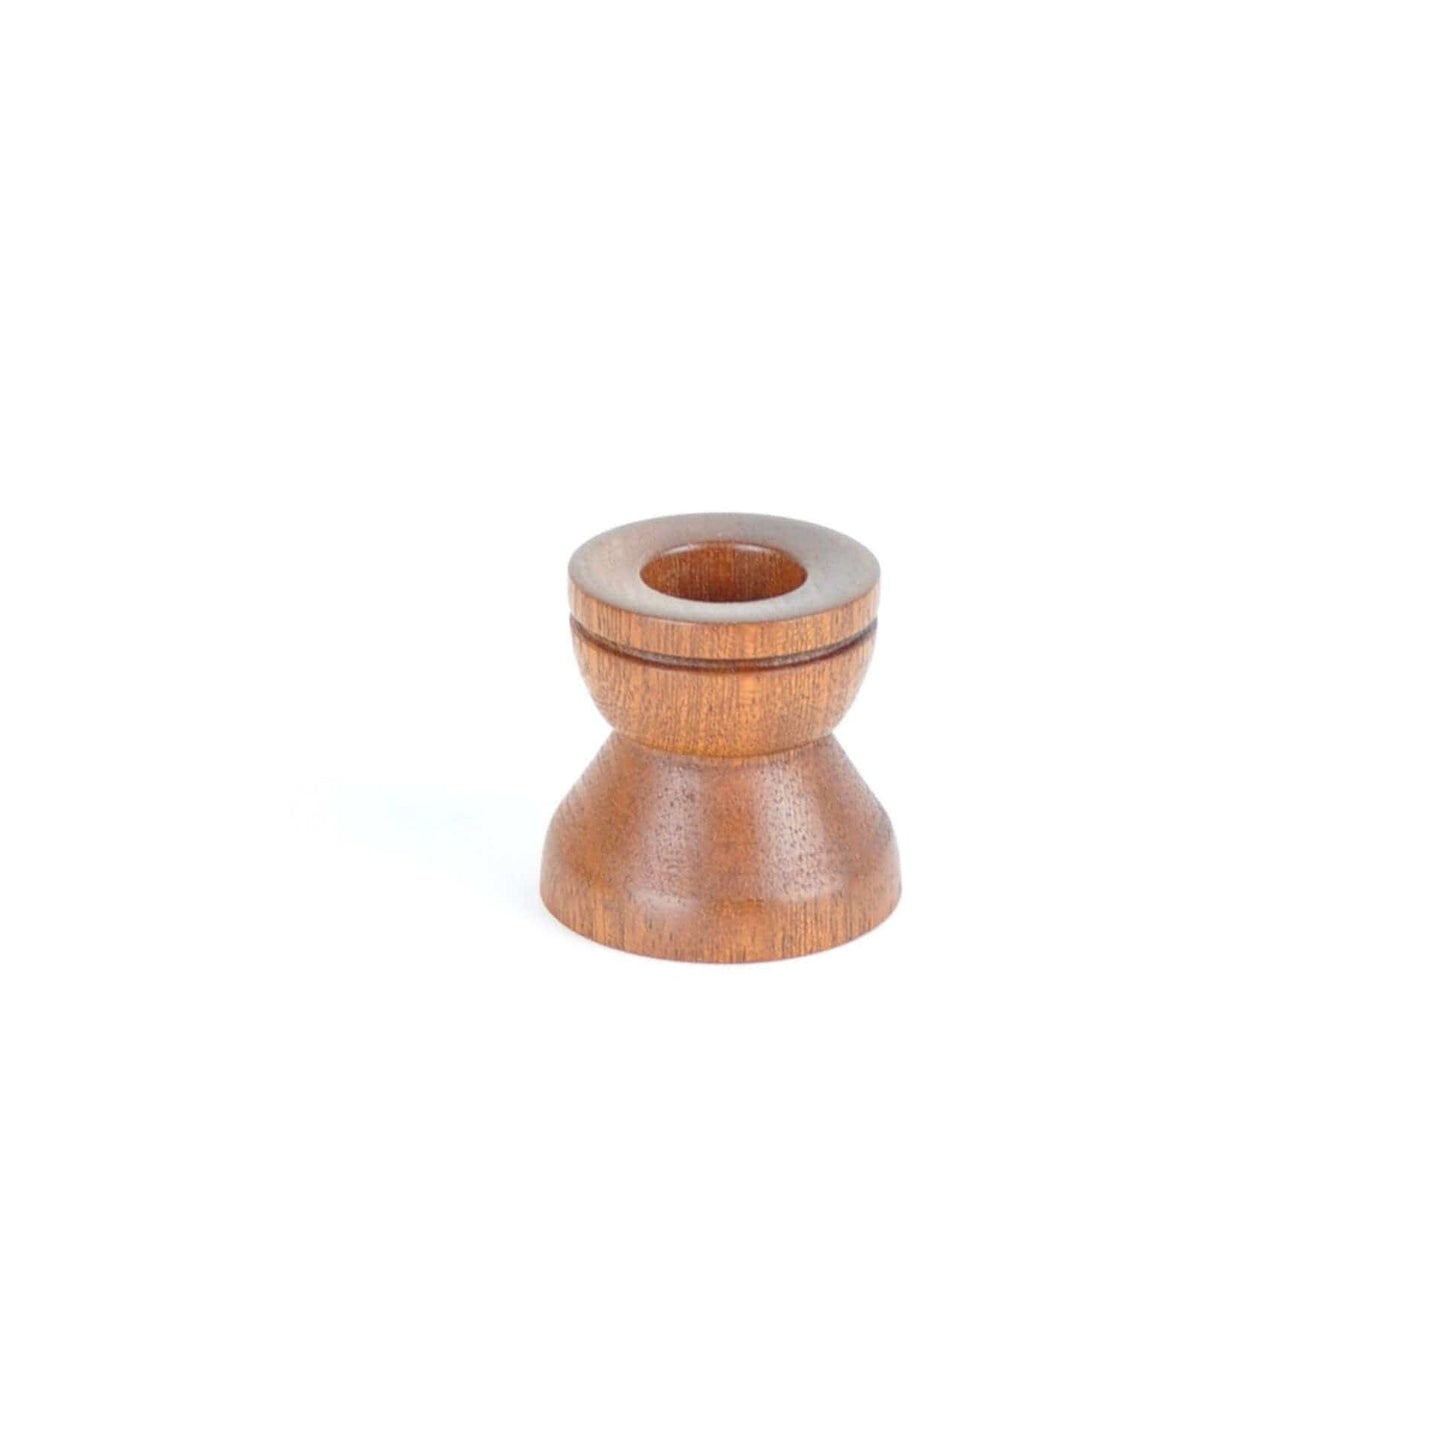 Something From The Turnery Candle Holder Wooden Candle Holders - Mahogany